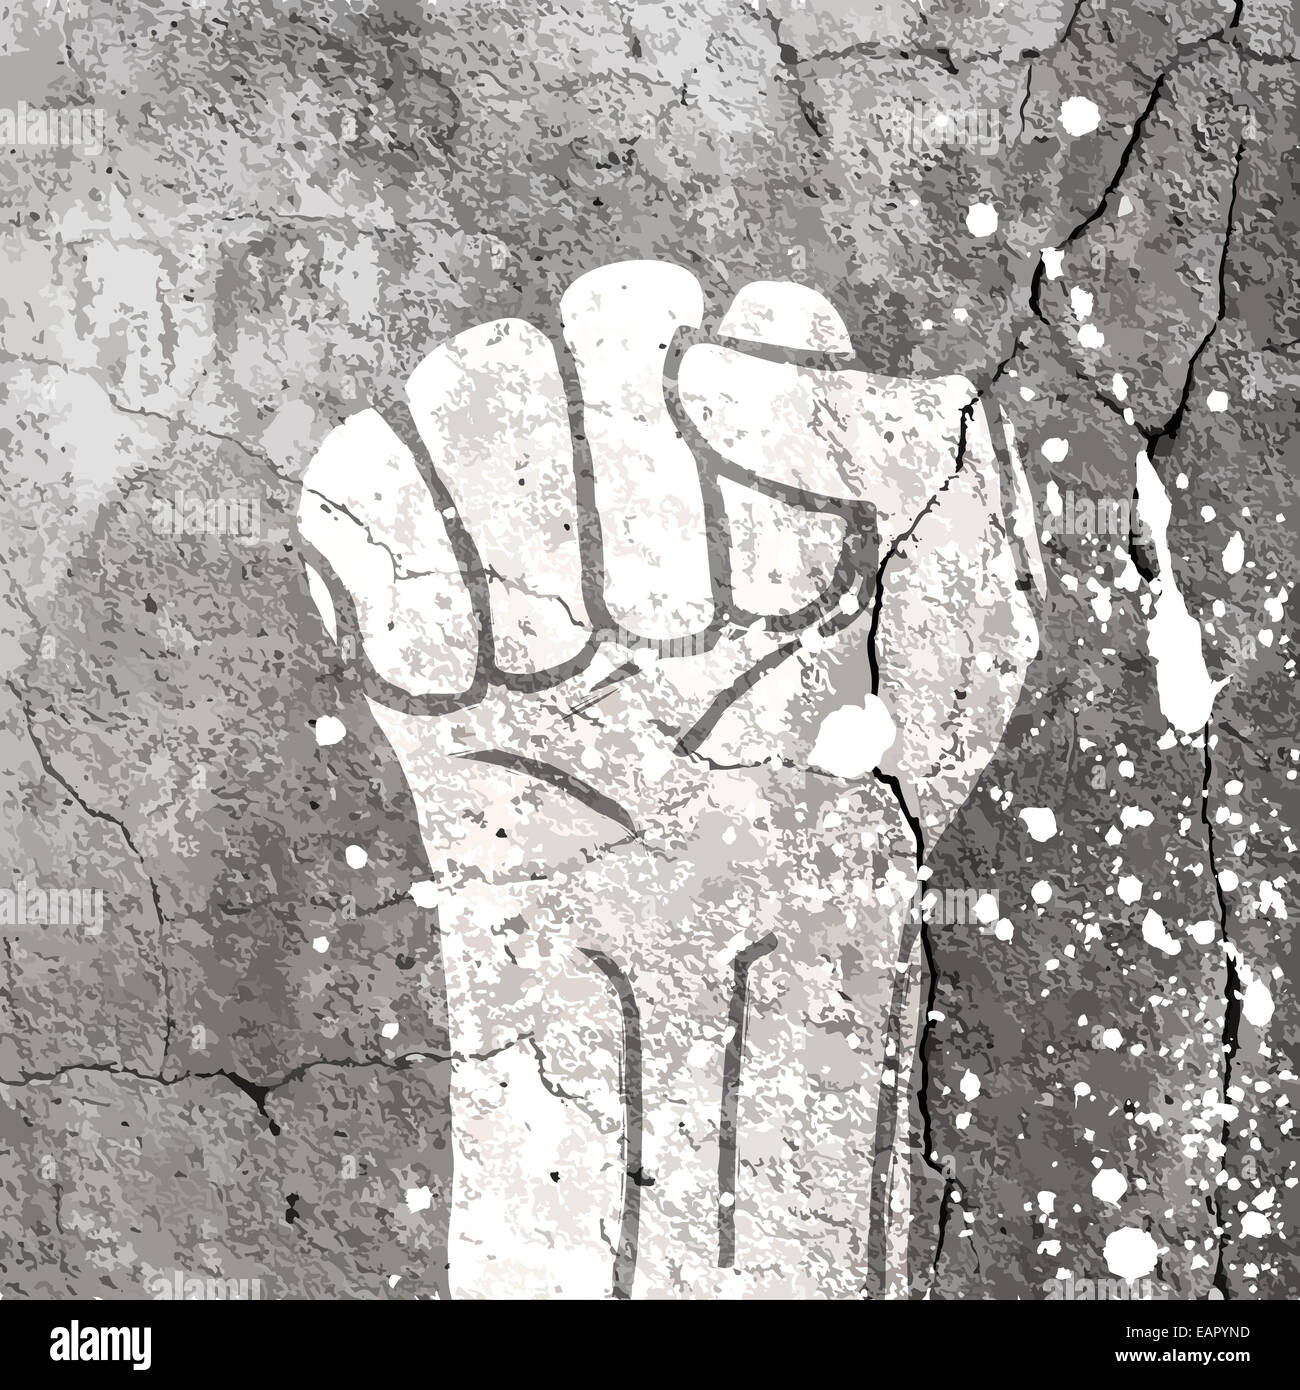 Grunge fist illustration on concrete texture with white splashes. Vector Stock Photo